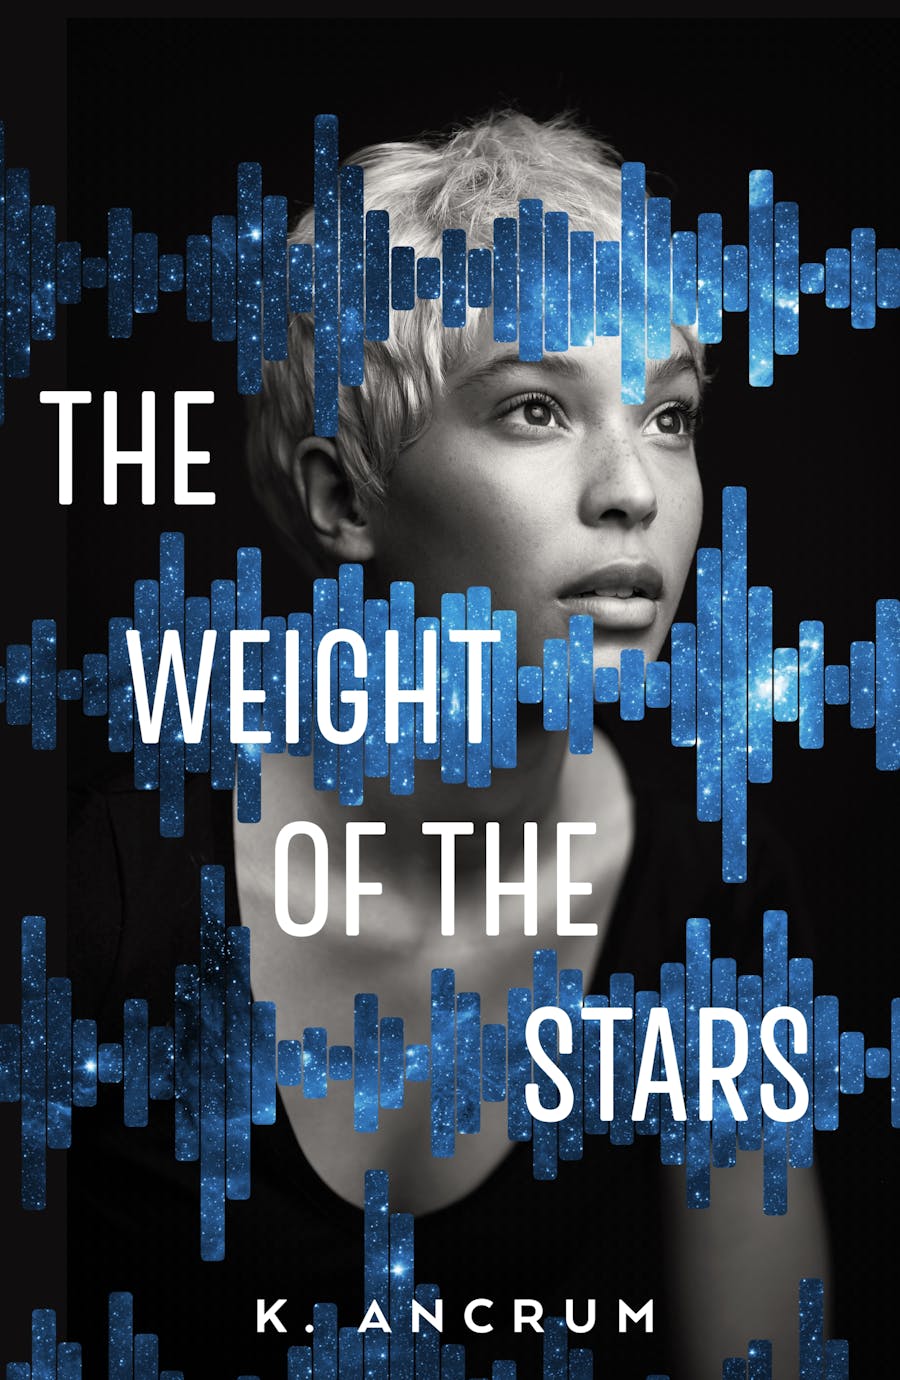 weight-of-the-stars-11-12